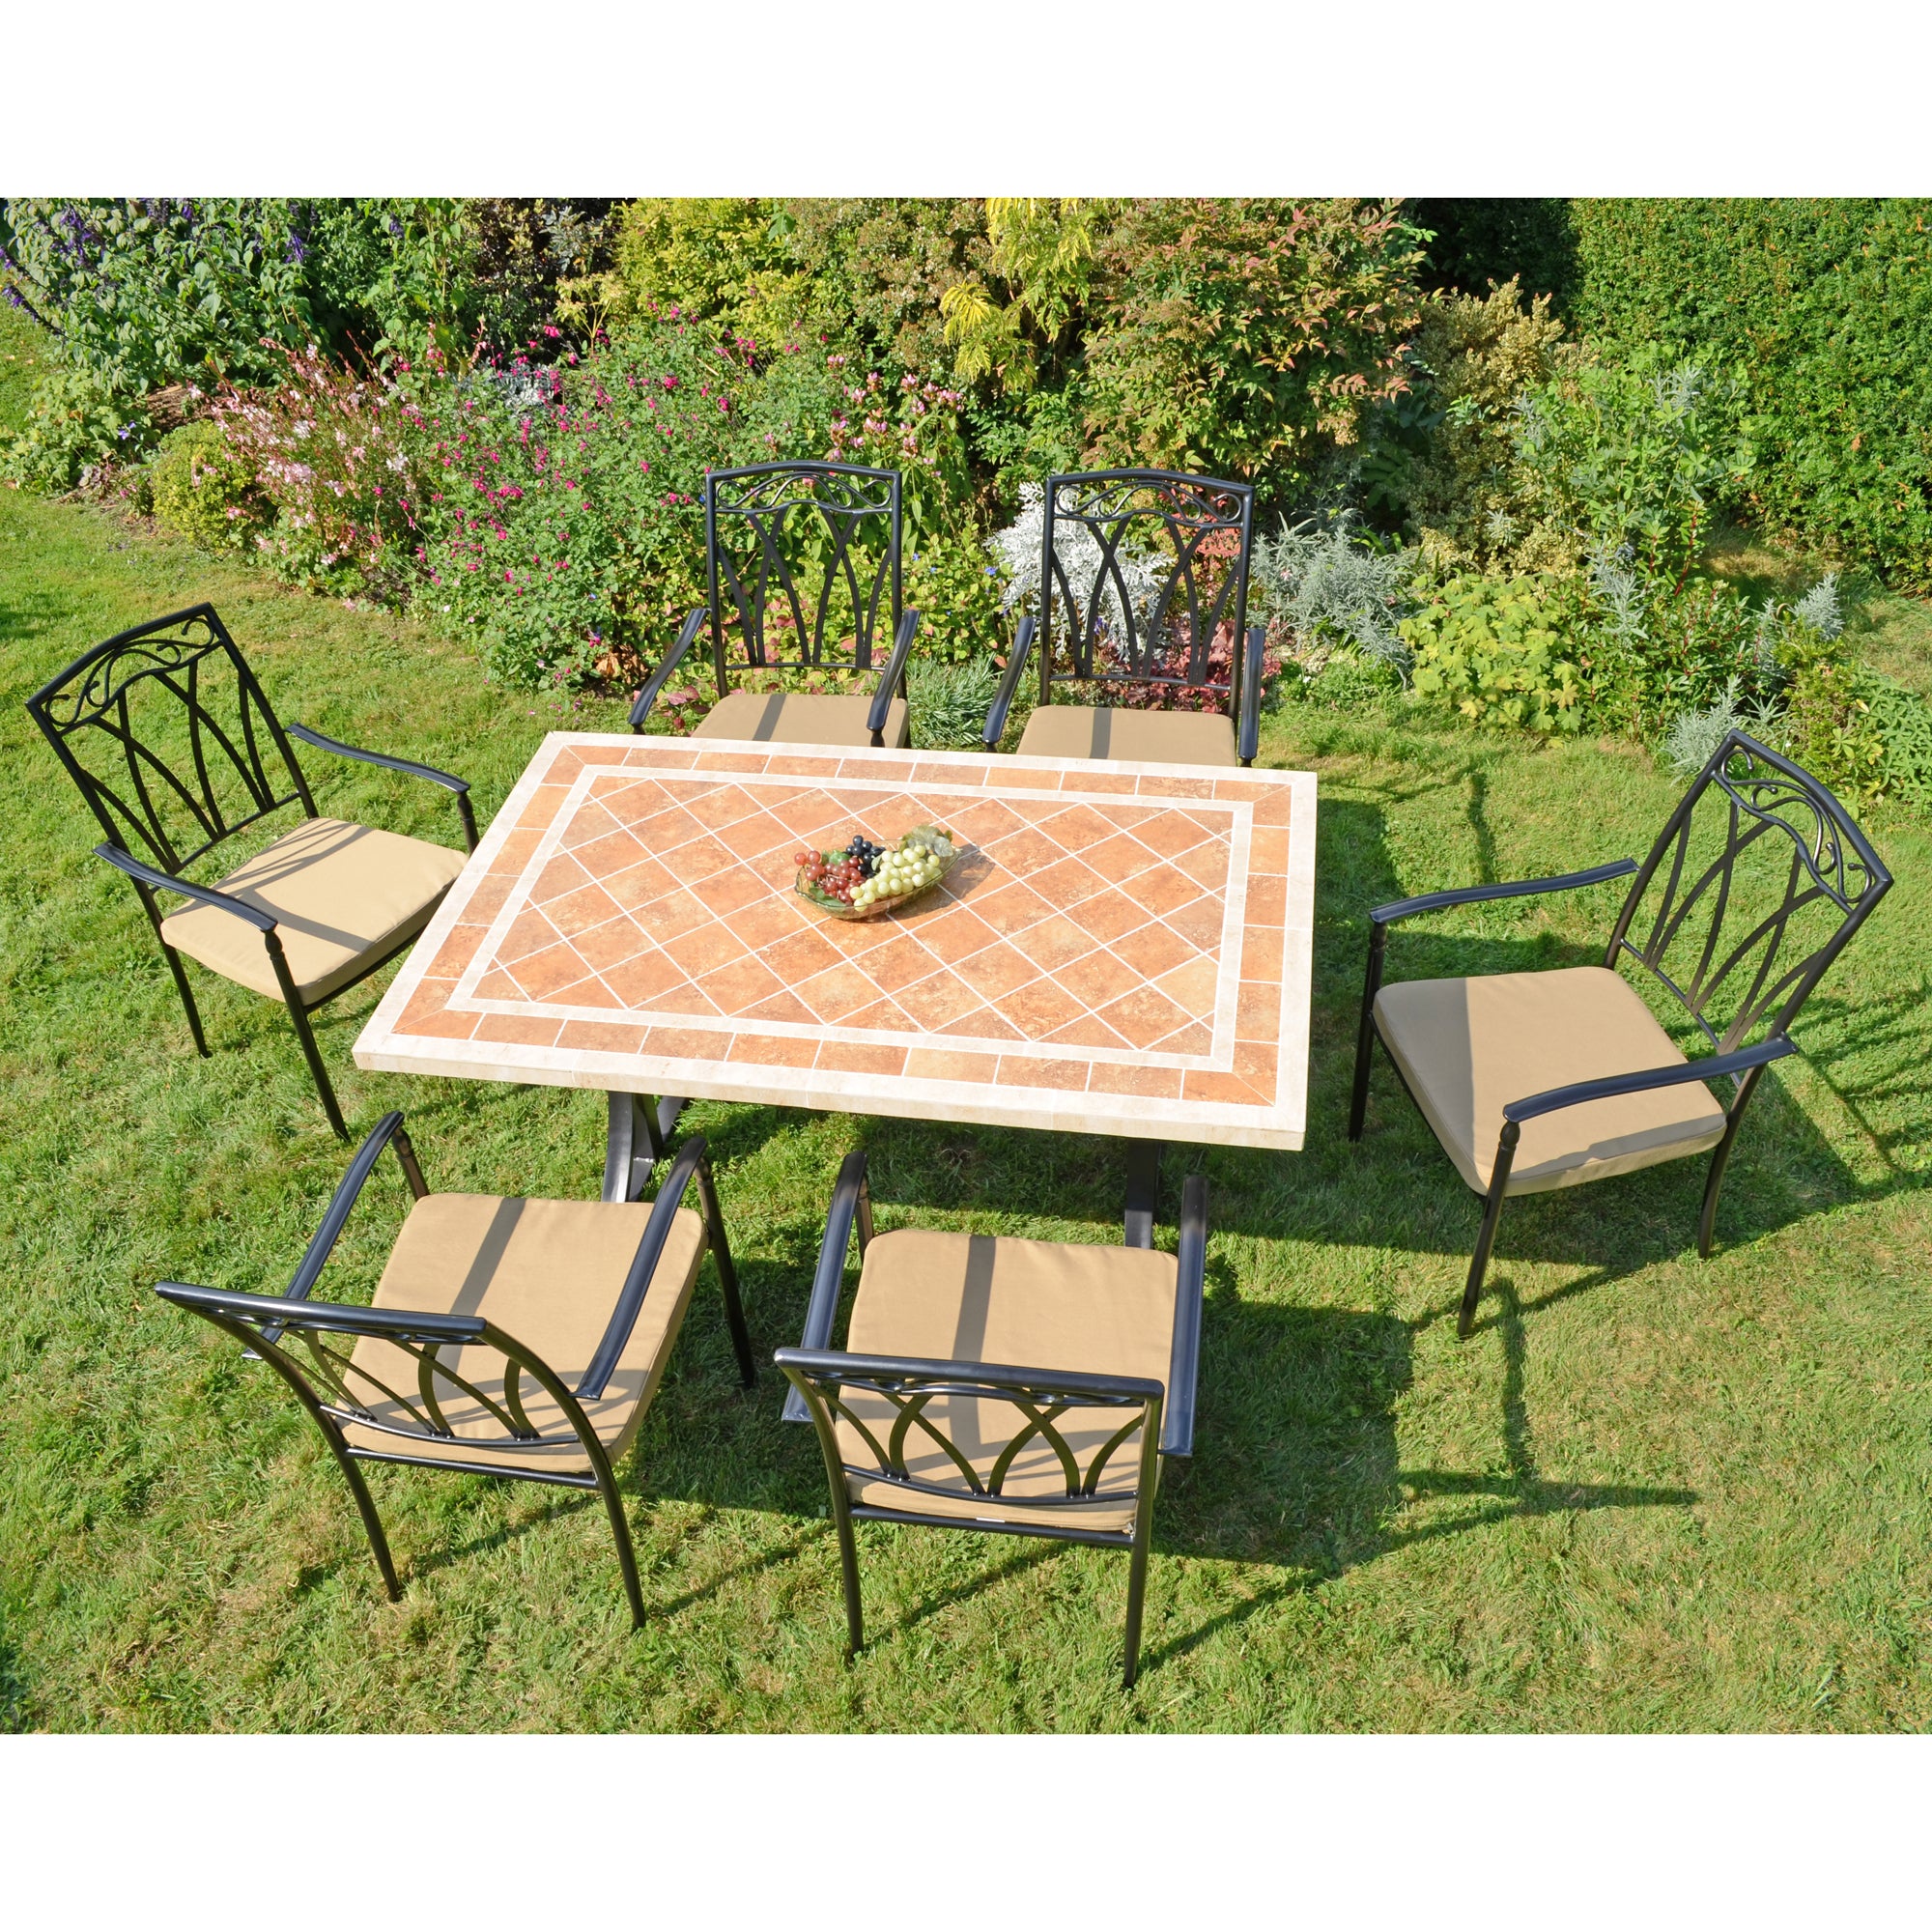 Byron Manor Hampton Stone Garden Dining Table with 6 Ascot Chairs Dining Sets Byron Manor   